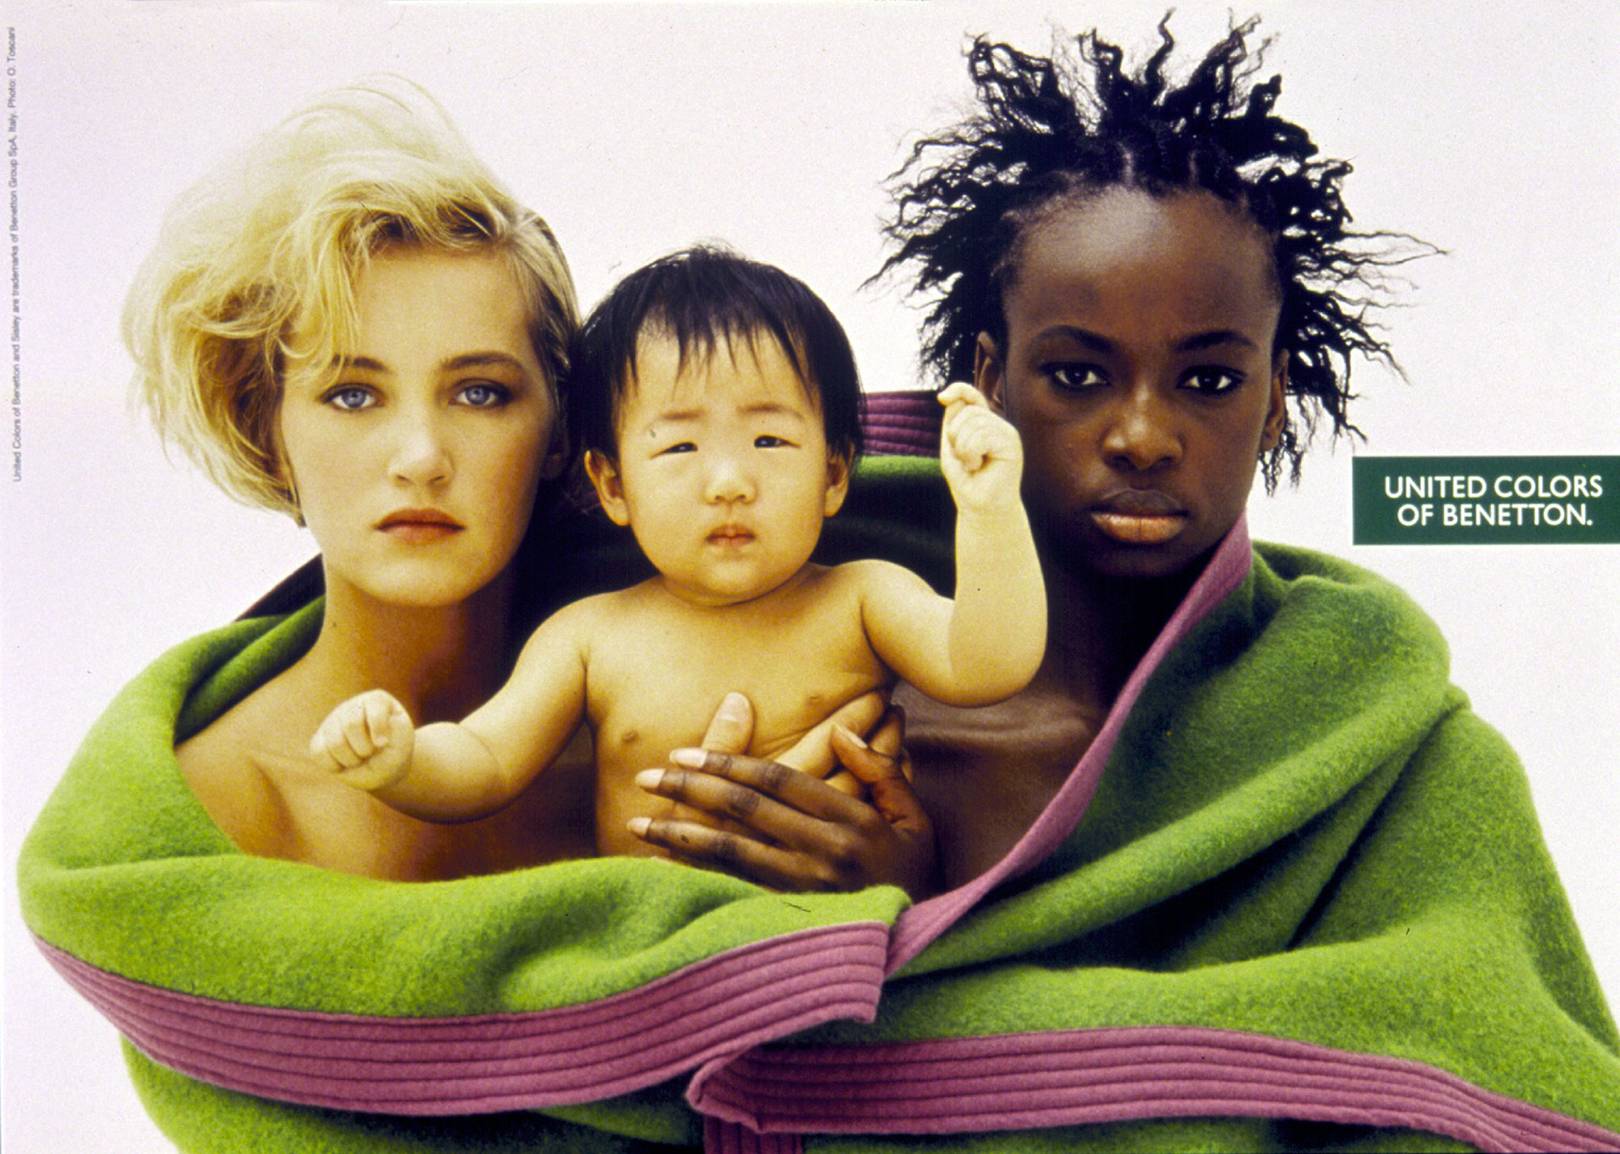 Image result for oliviero toscani united colors of benetton aids